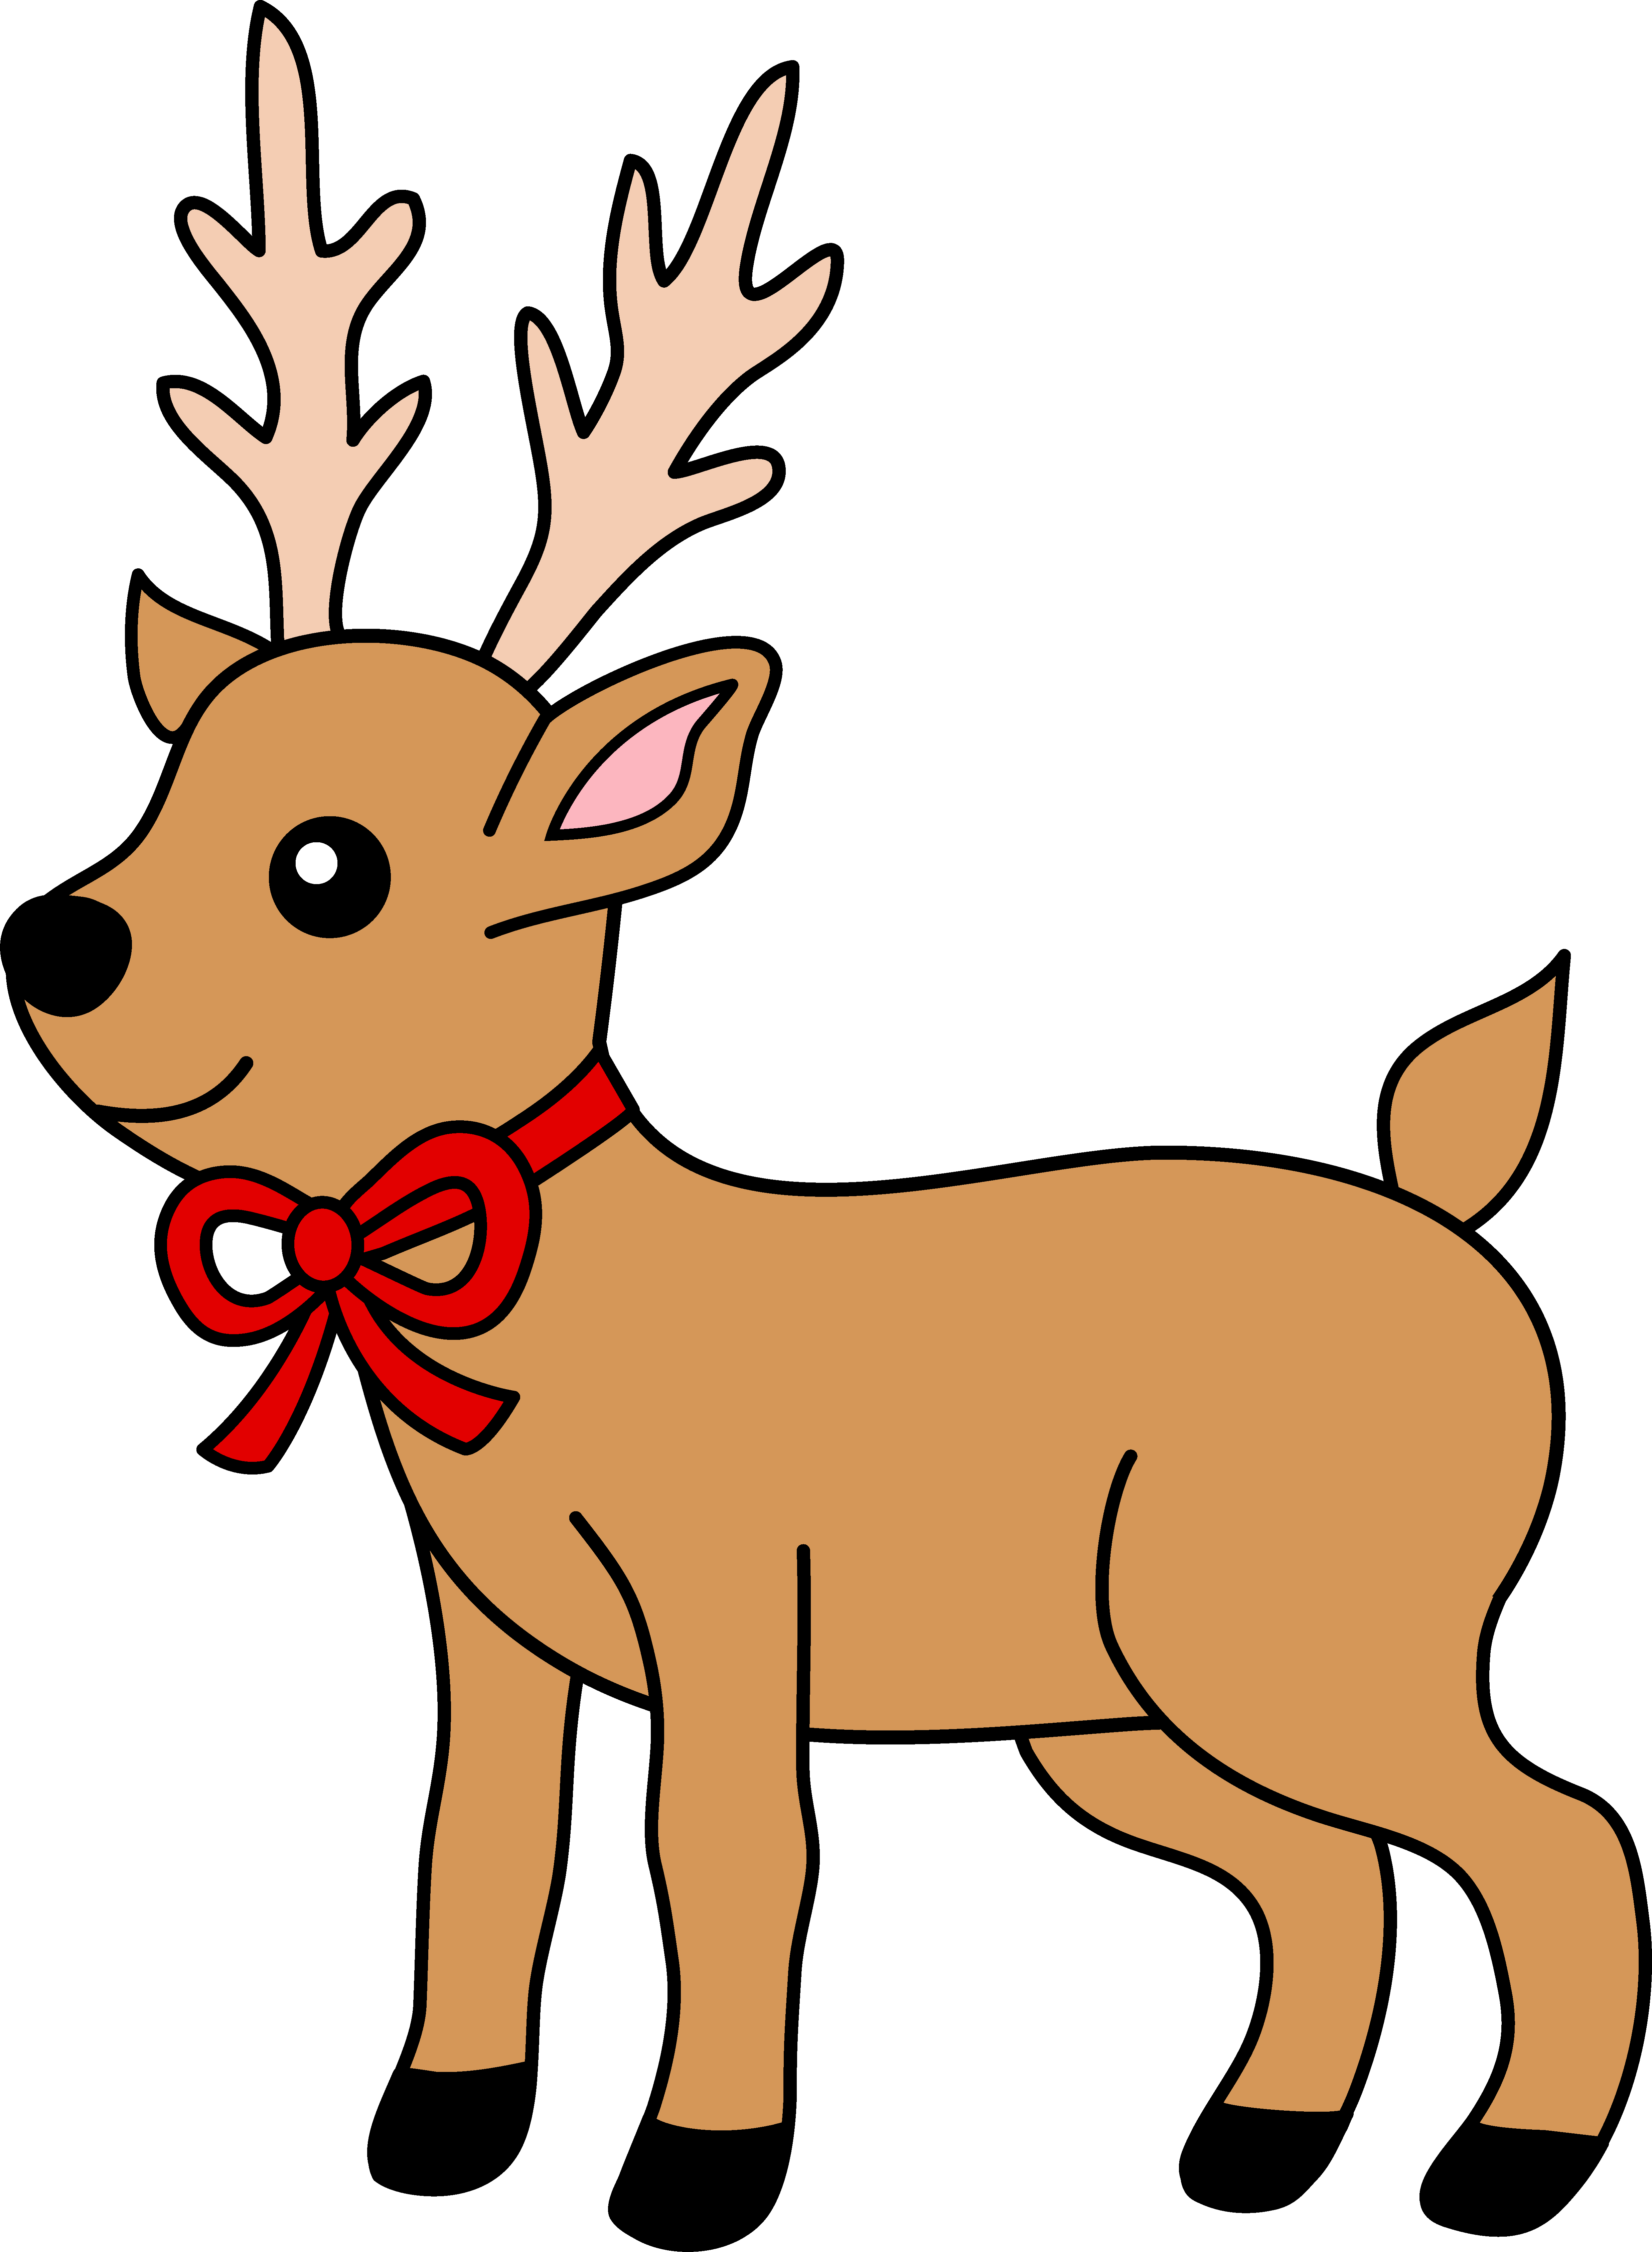 animated christmas reindeer clipart - Clipground